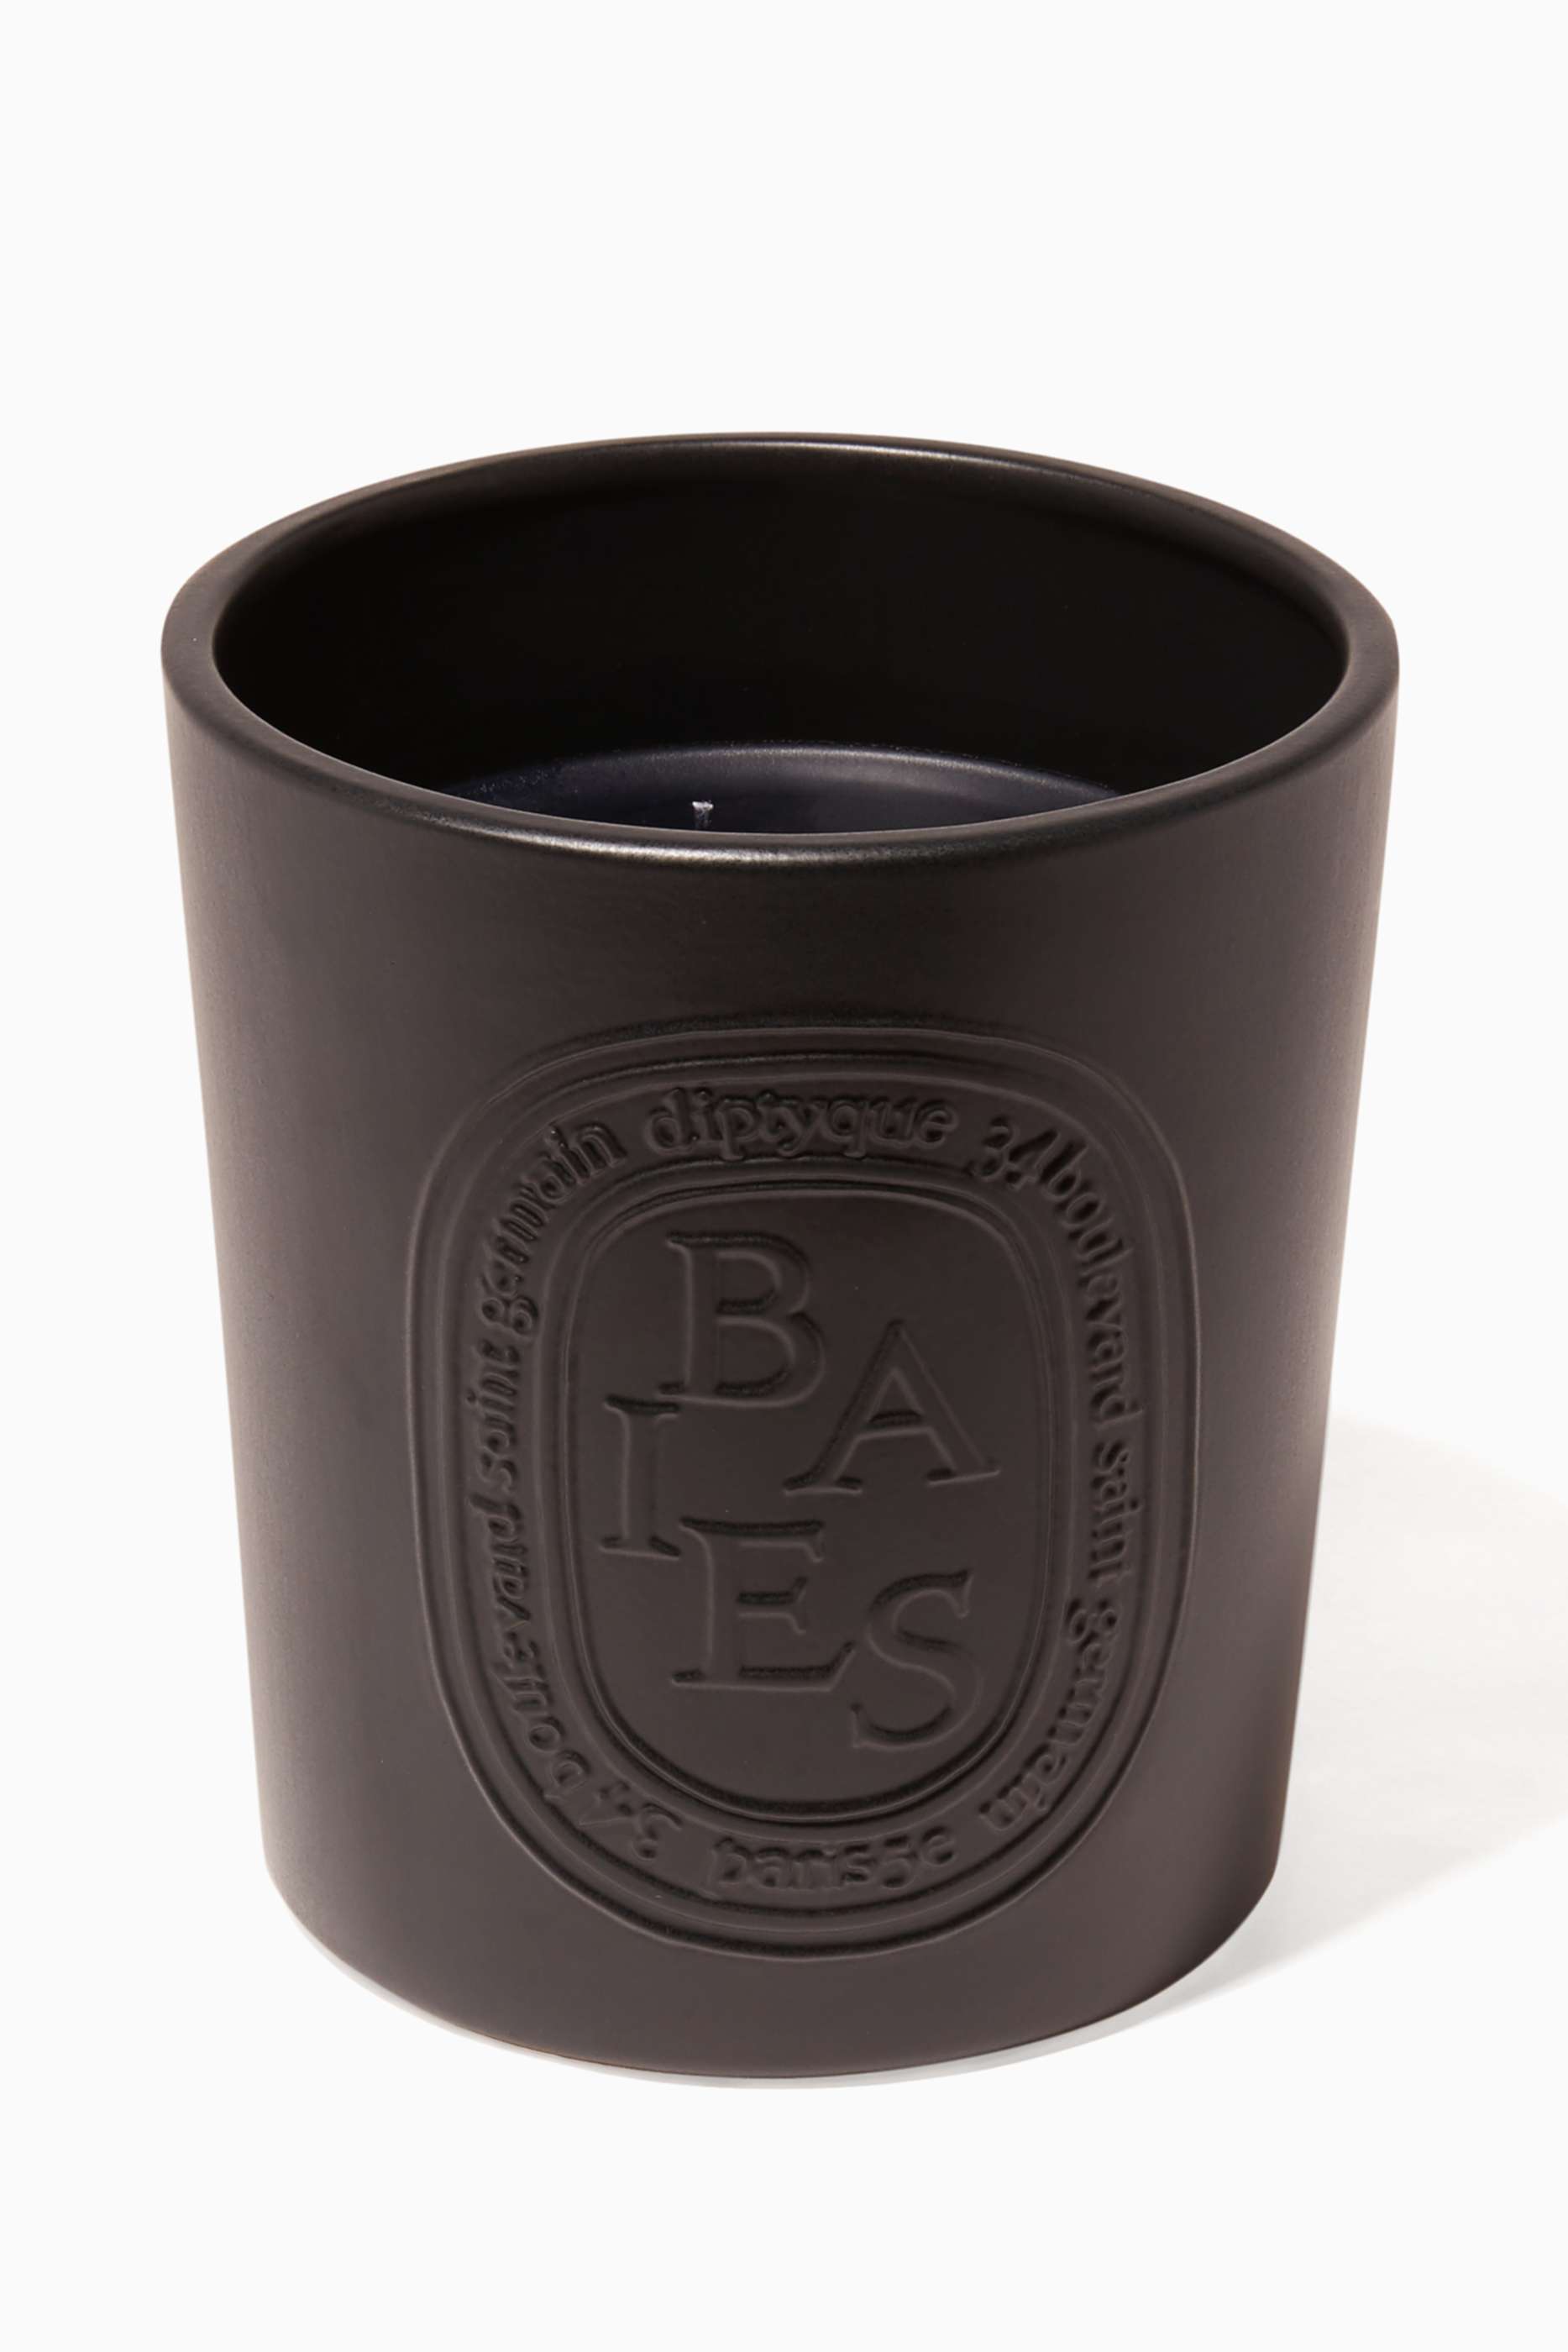 shop-diptyque-baies-candle-1500g-for-unisex